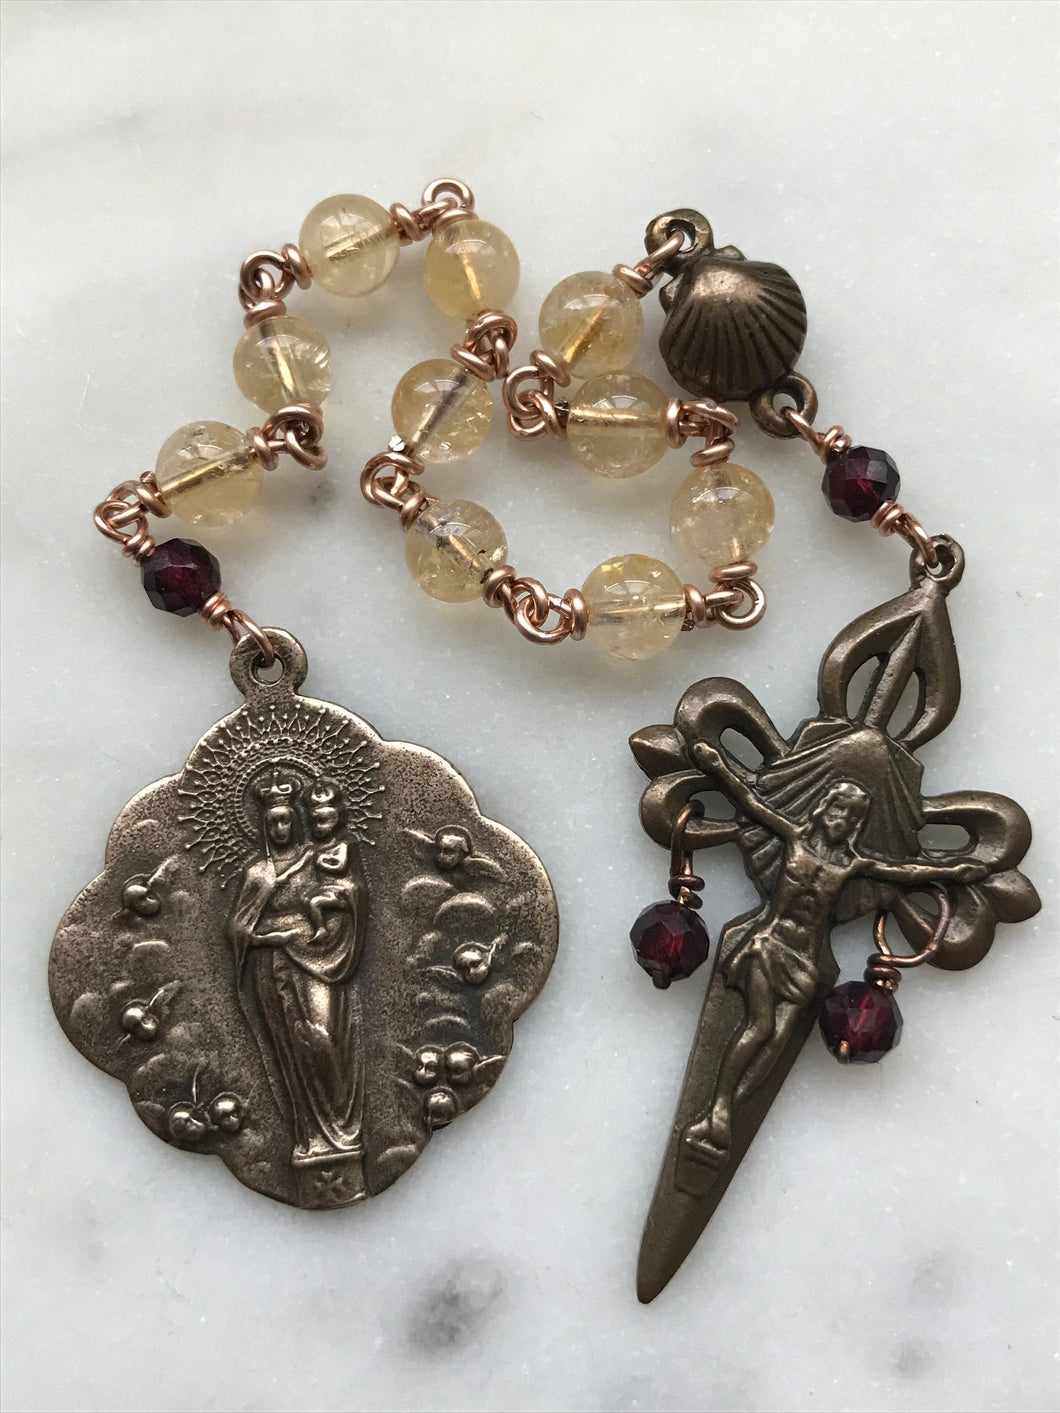 Saint James Pocket Rosary - Our Lady of the Pillar - Citrine and Bronze CeCeAgnes